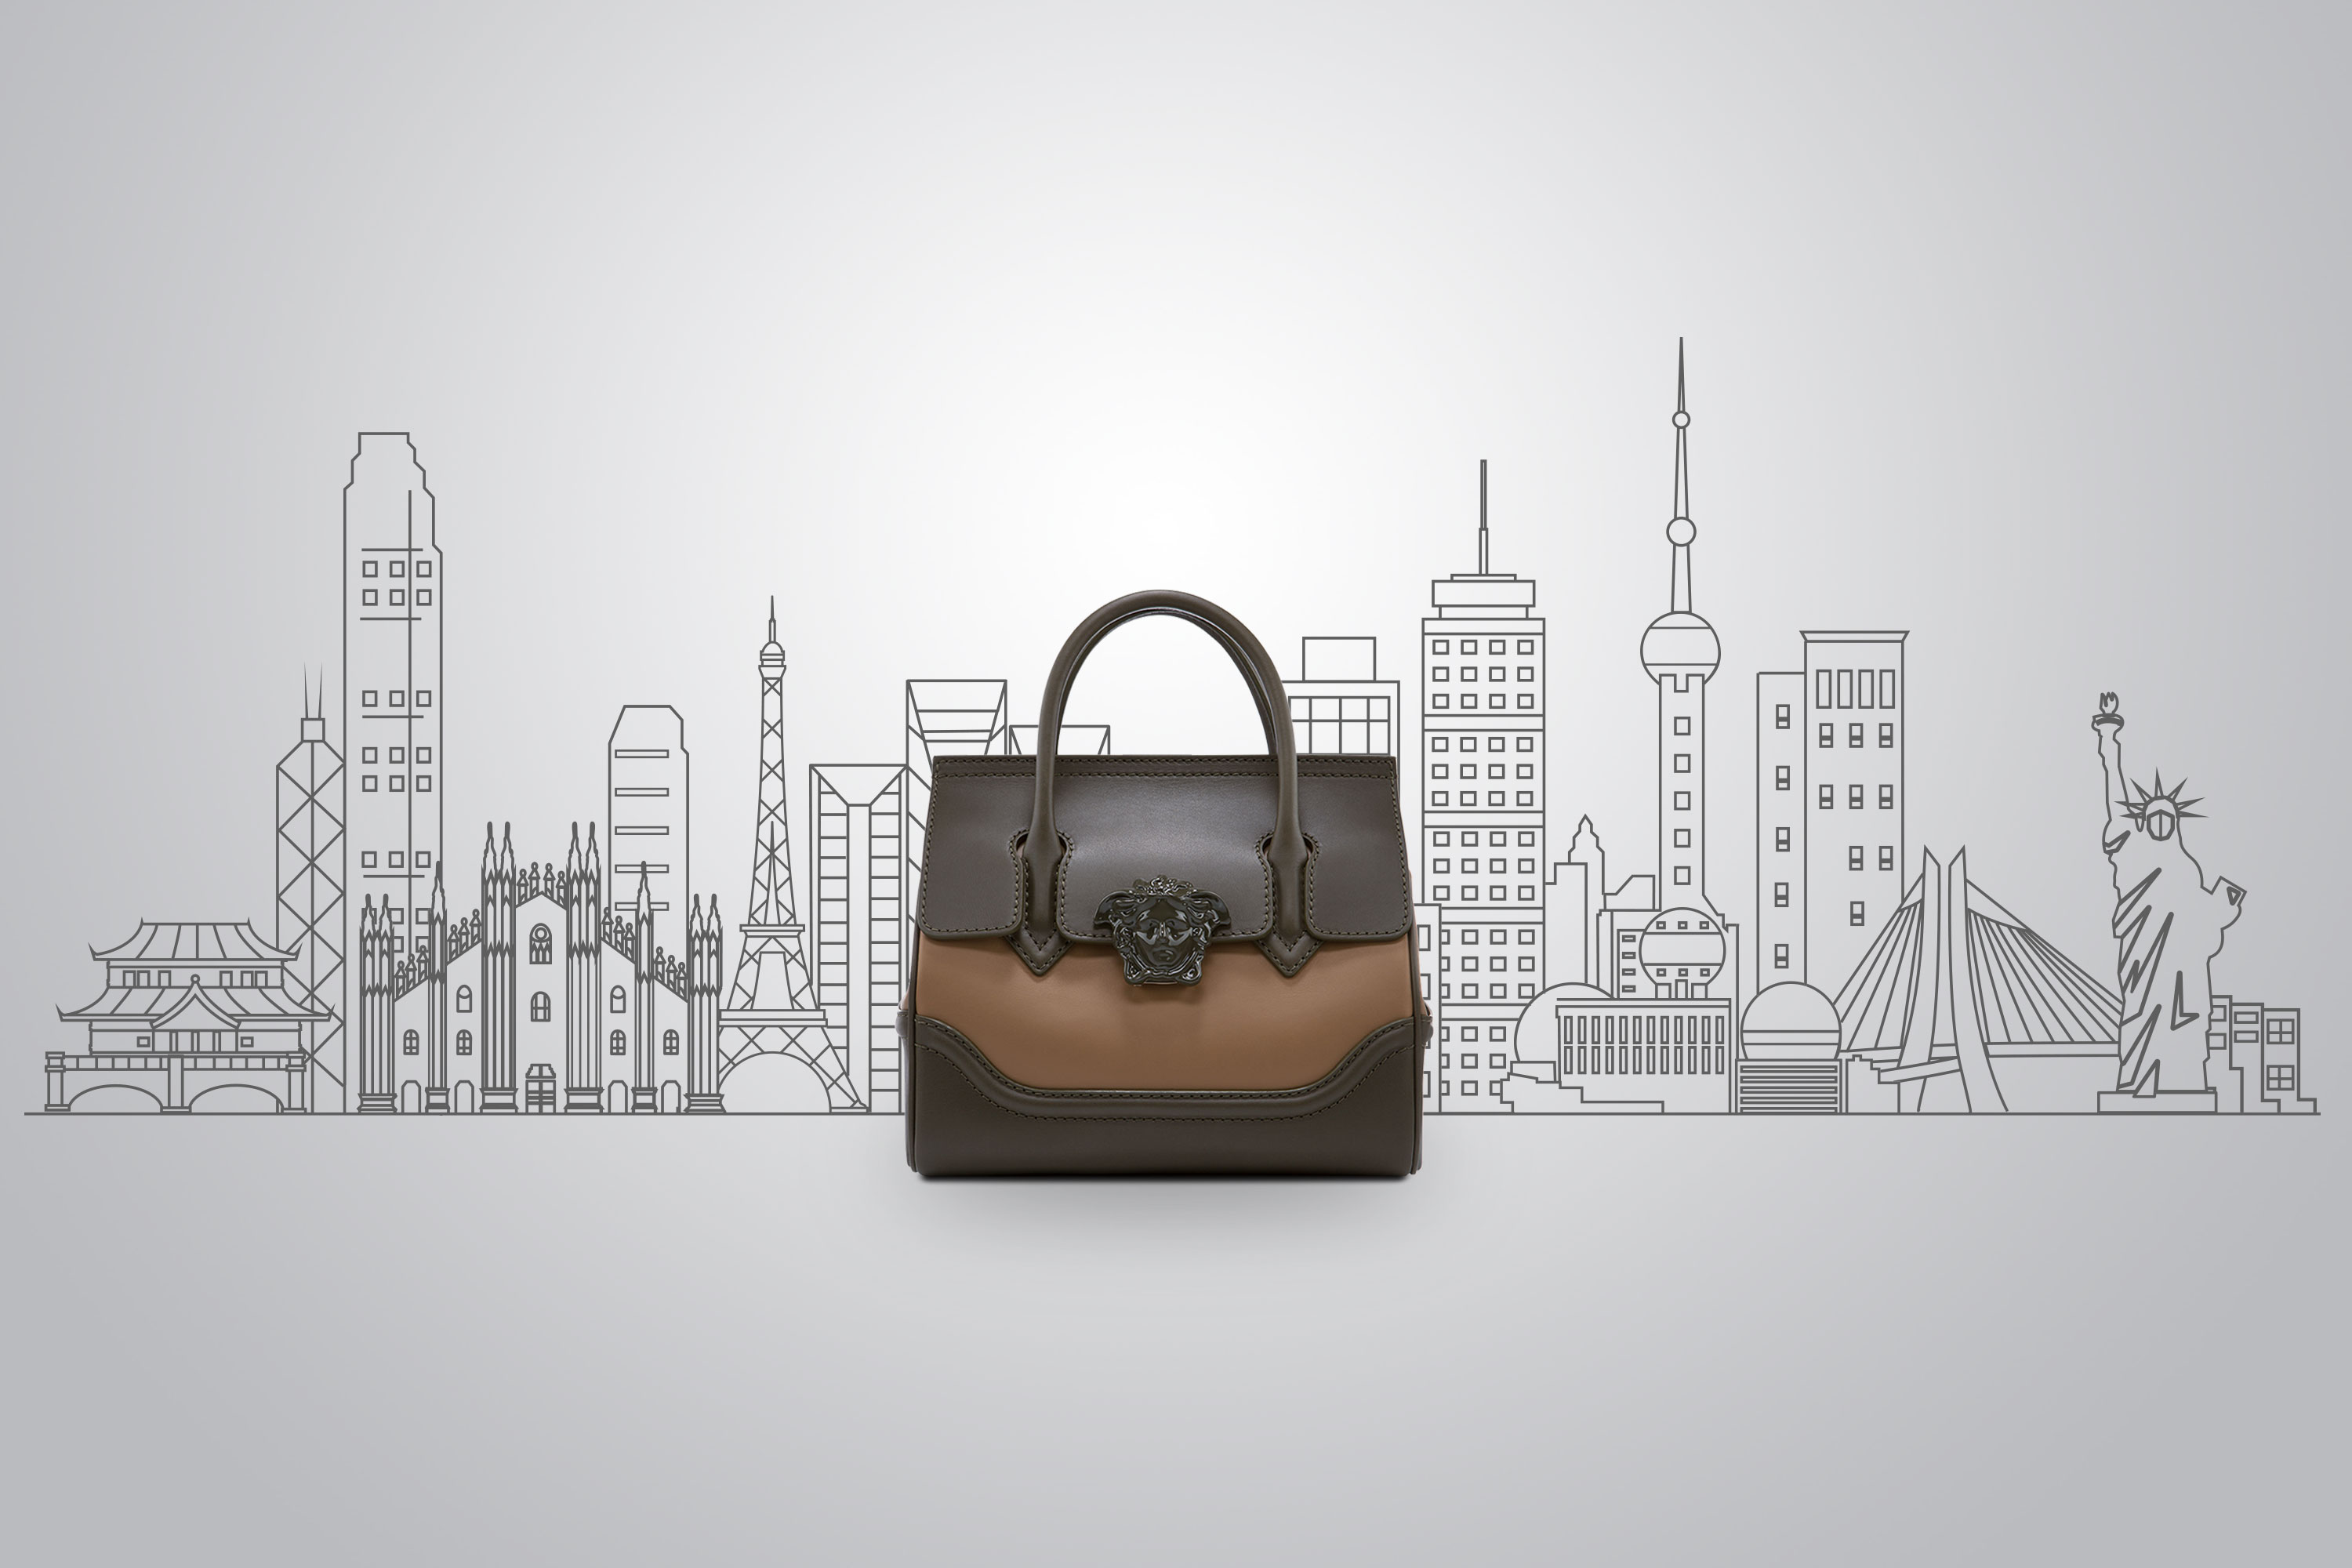 Versace Palazzo Empire Bag Inspires 7 Bags for 7 Cities Design Contest -  Lux Exposé